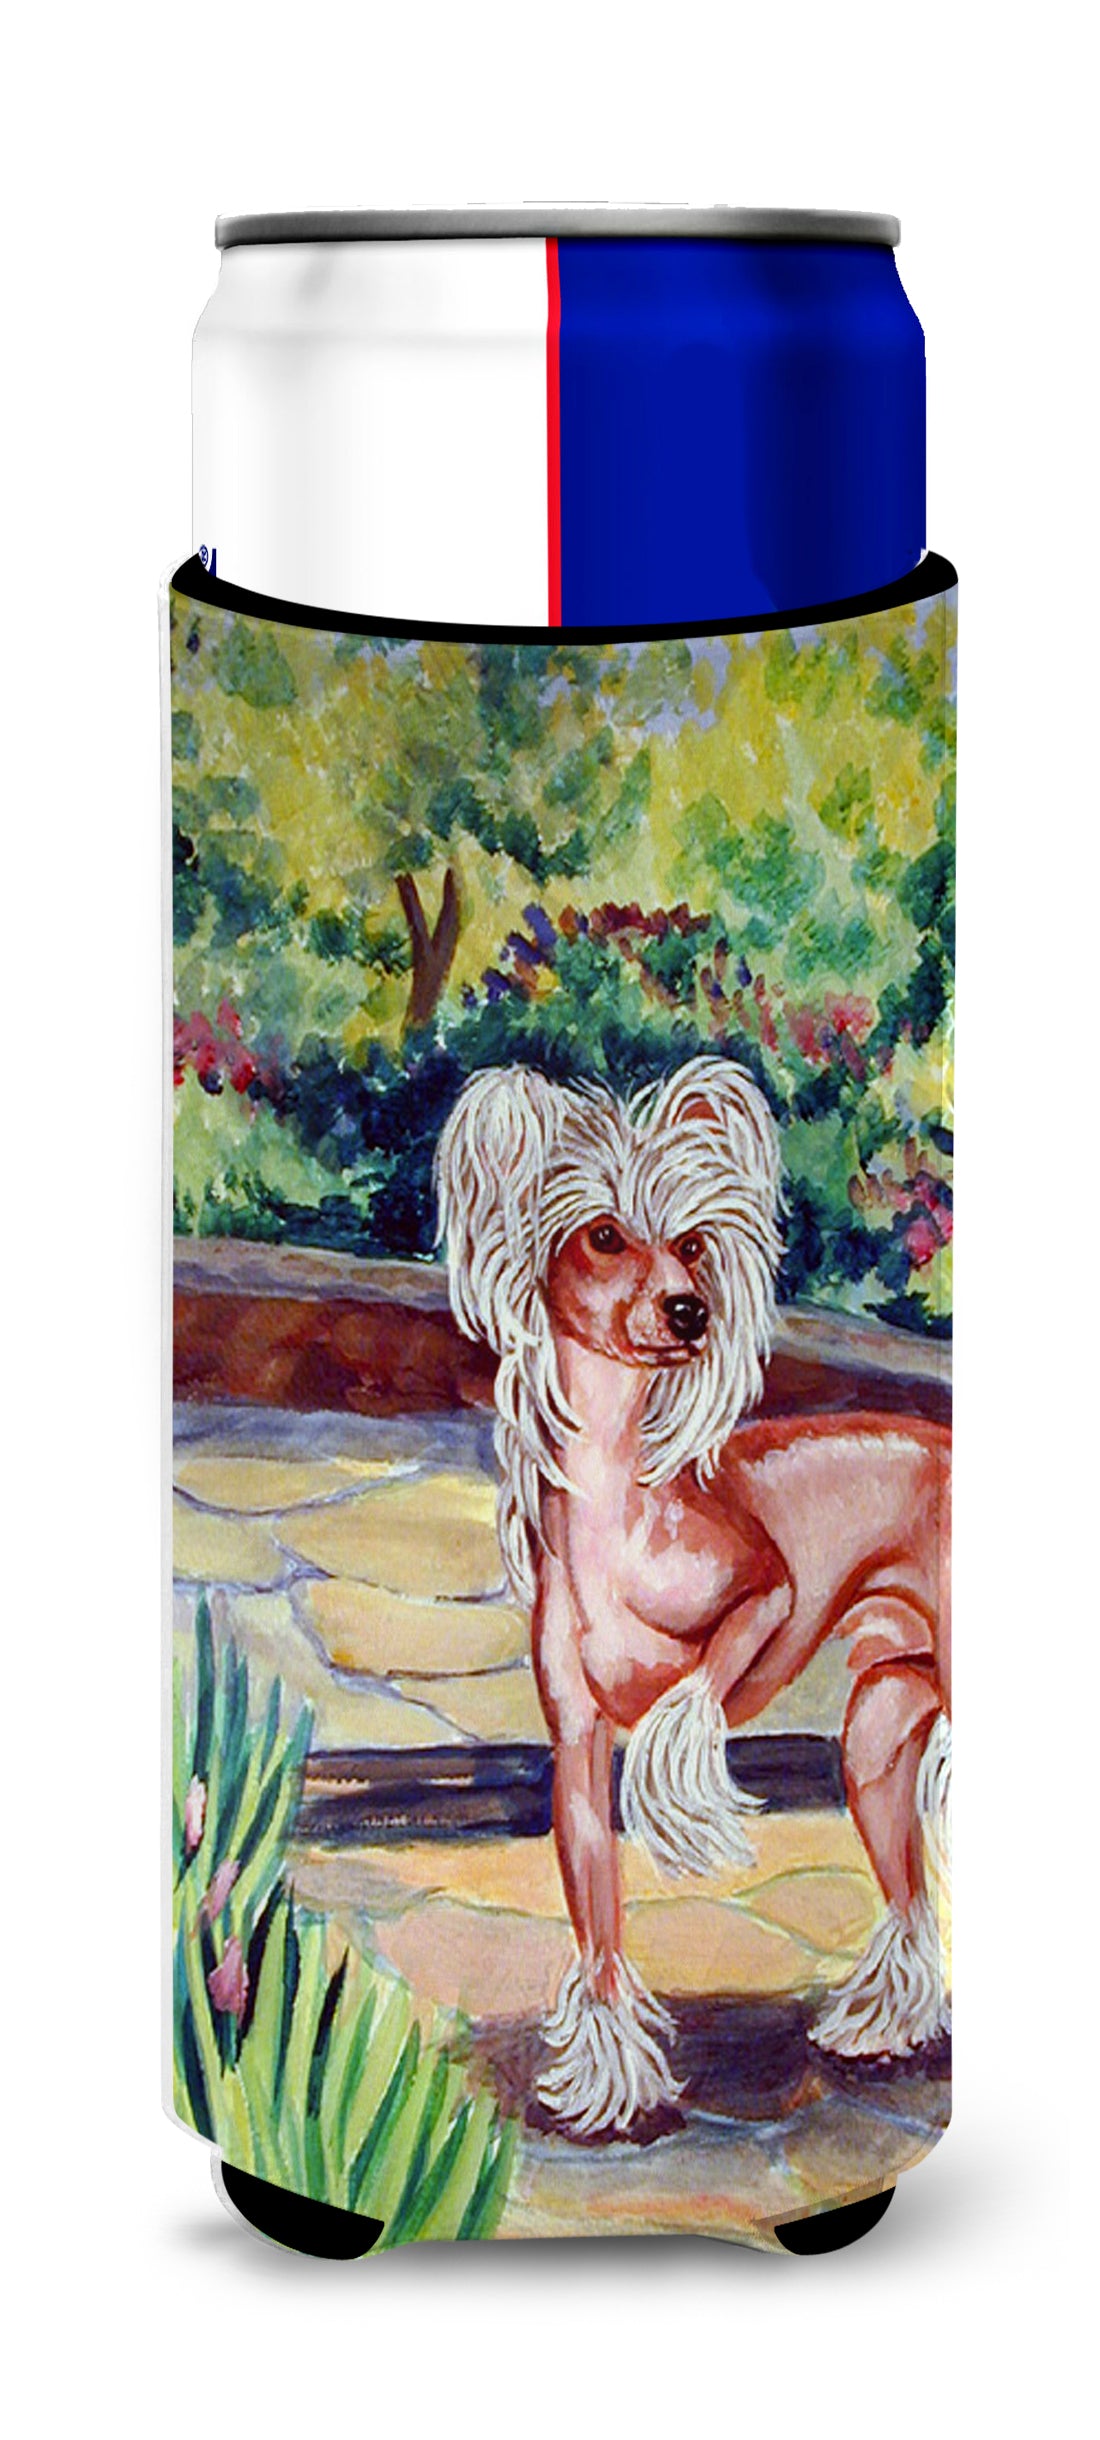 Chinese Crested on the Patio Ultra Beverage Insulators for slim cans 7021MUK.